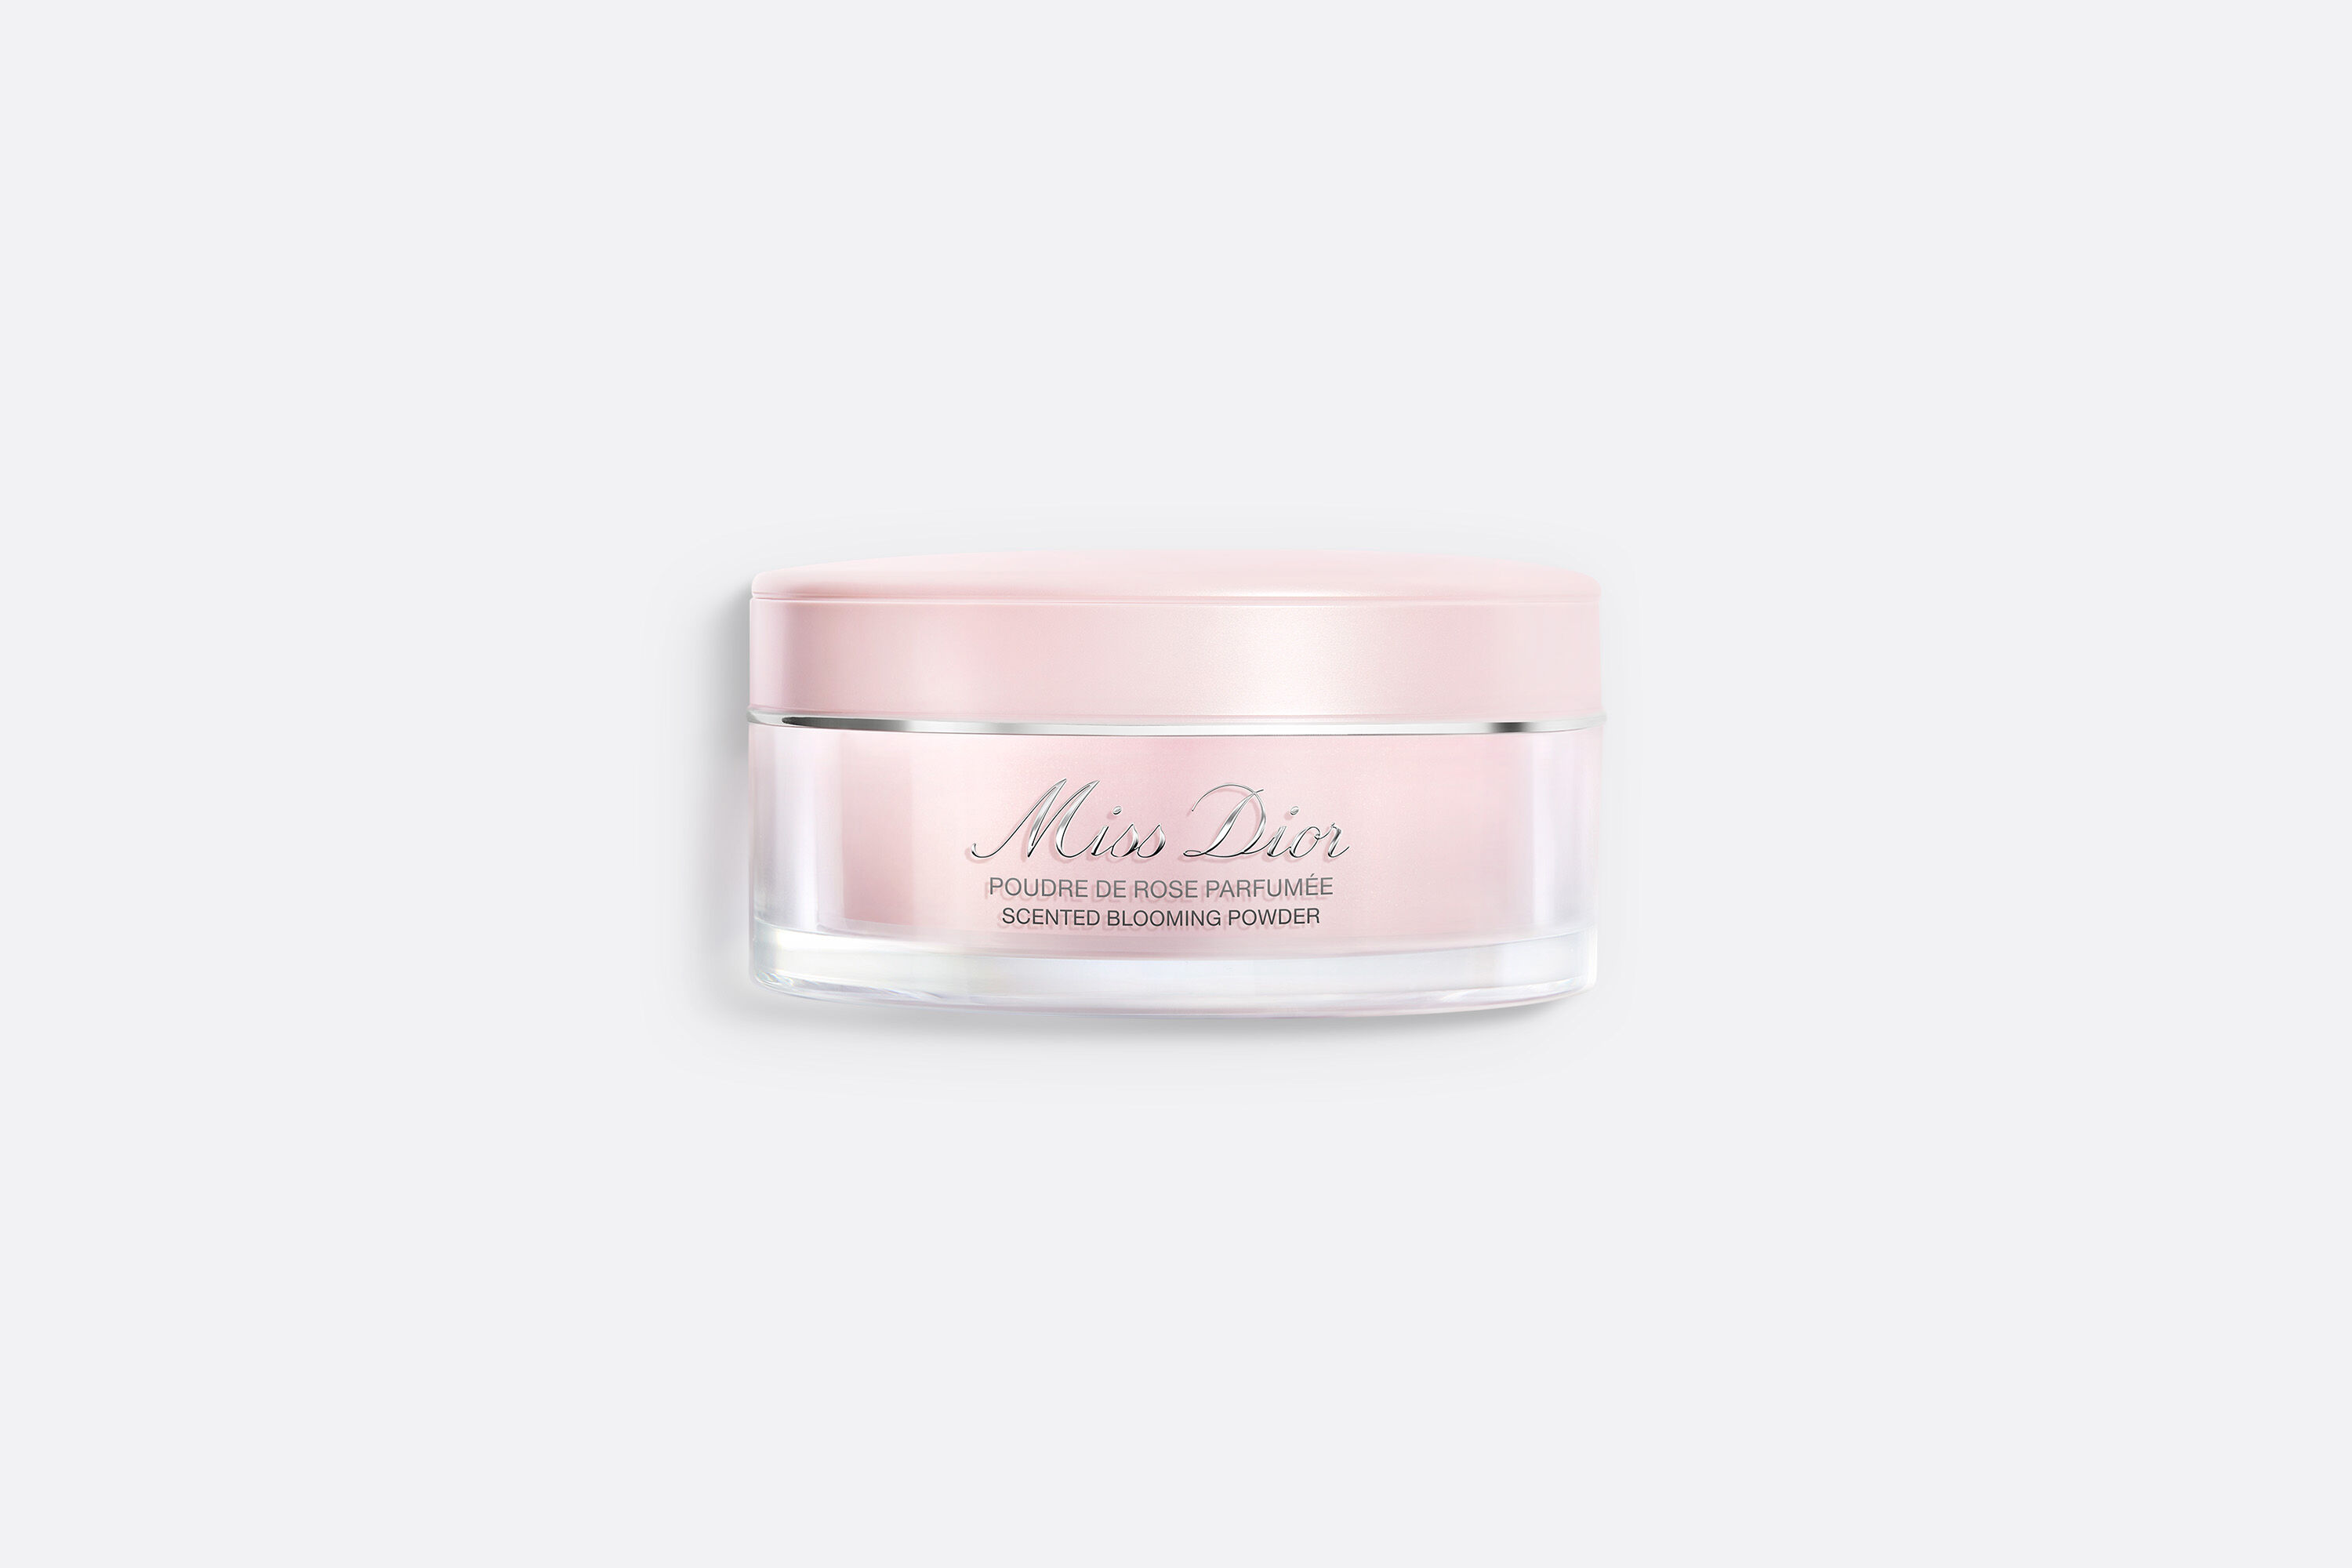 Forurenet aktivt analyse The new Miss Dior scented blooming body powder | DIOR